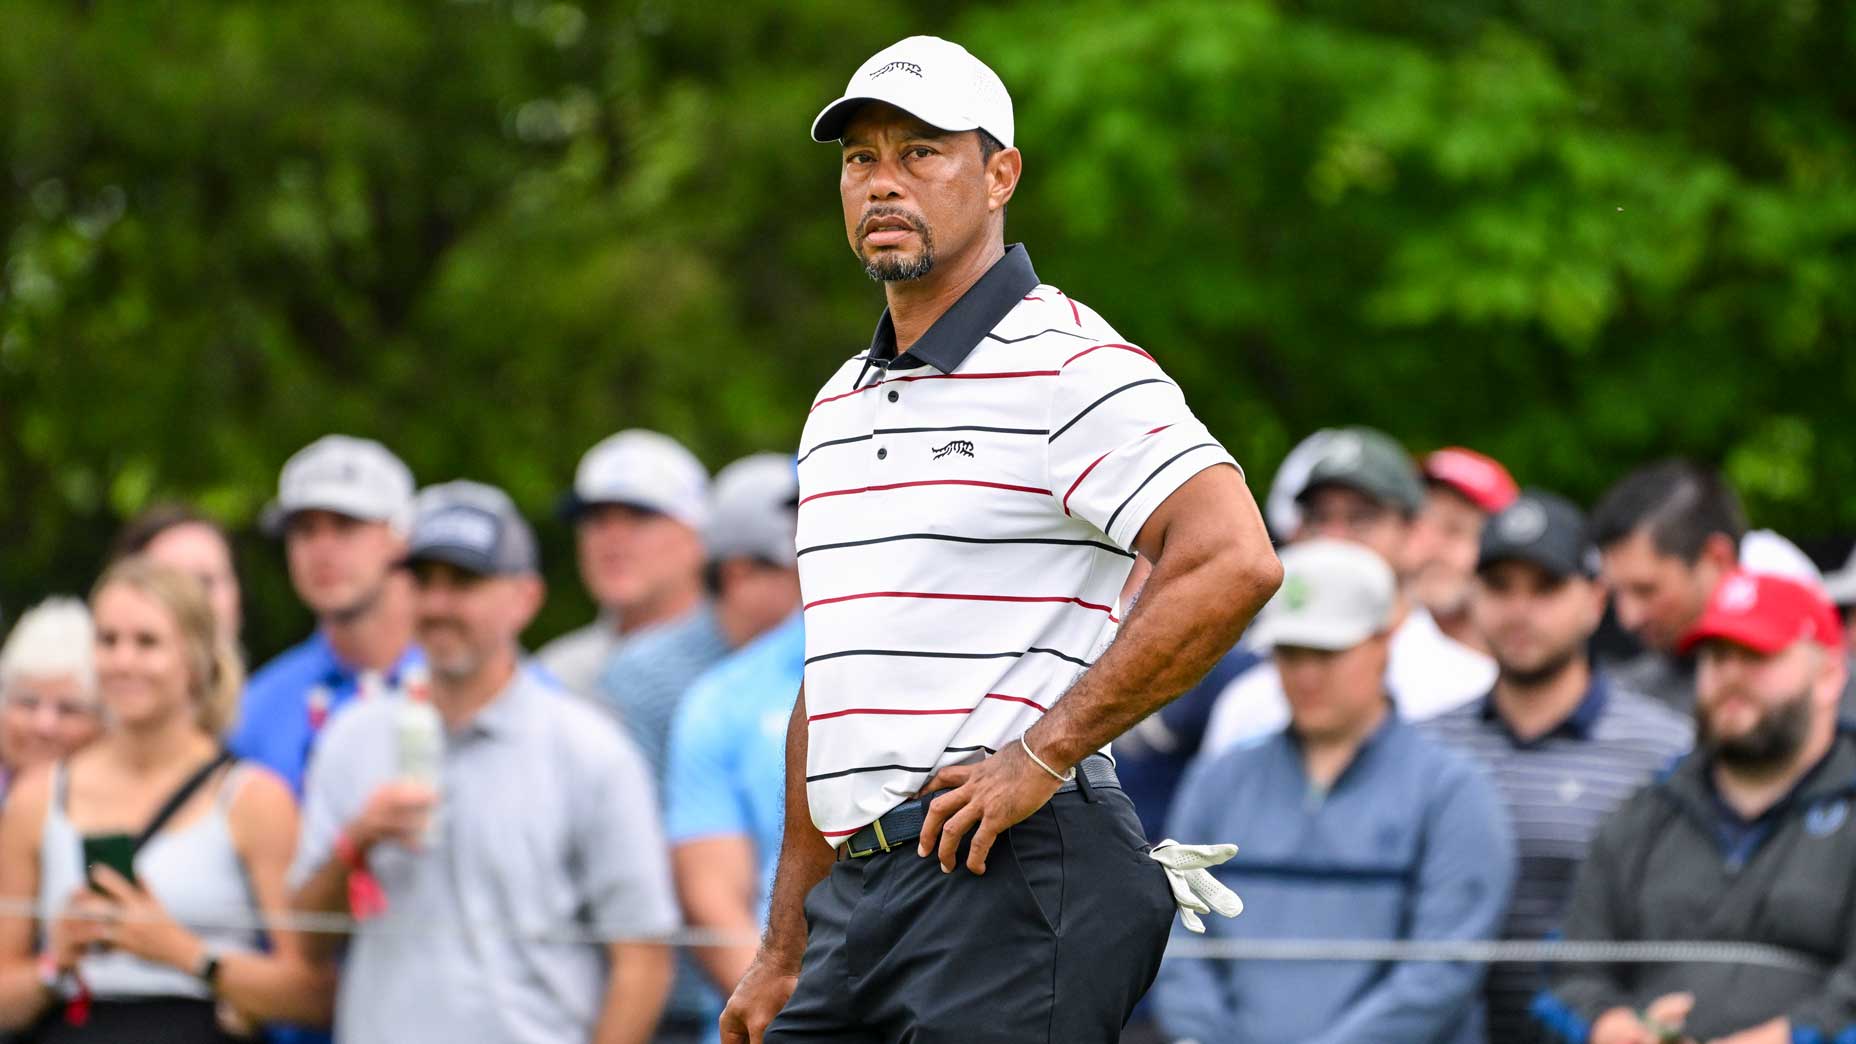 After major letdown, Tiger Woods confronts one tough truth